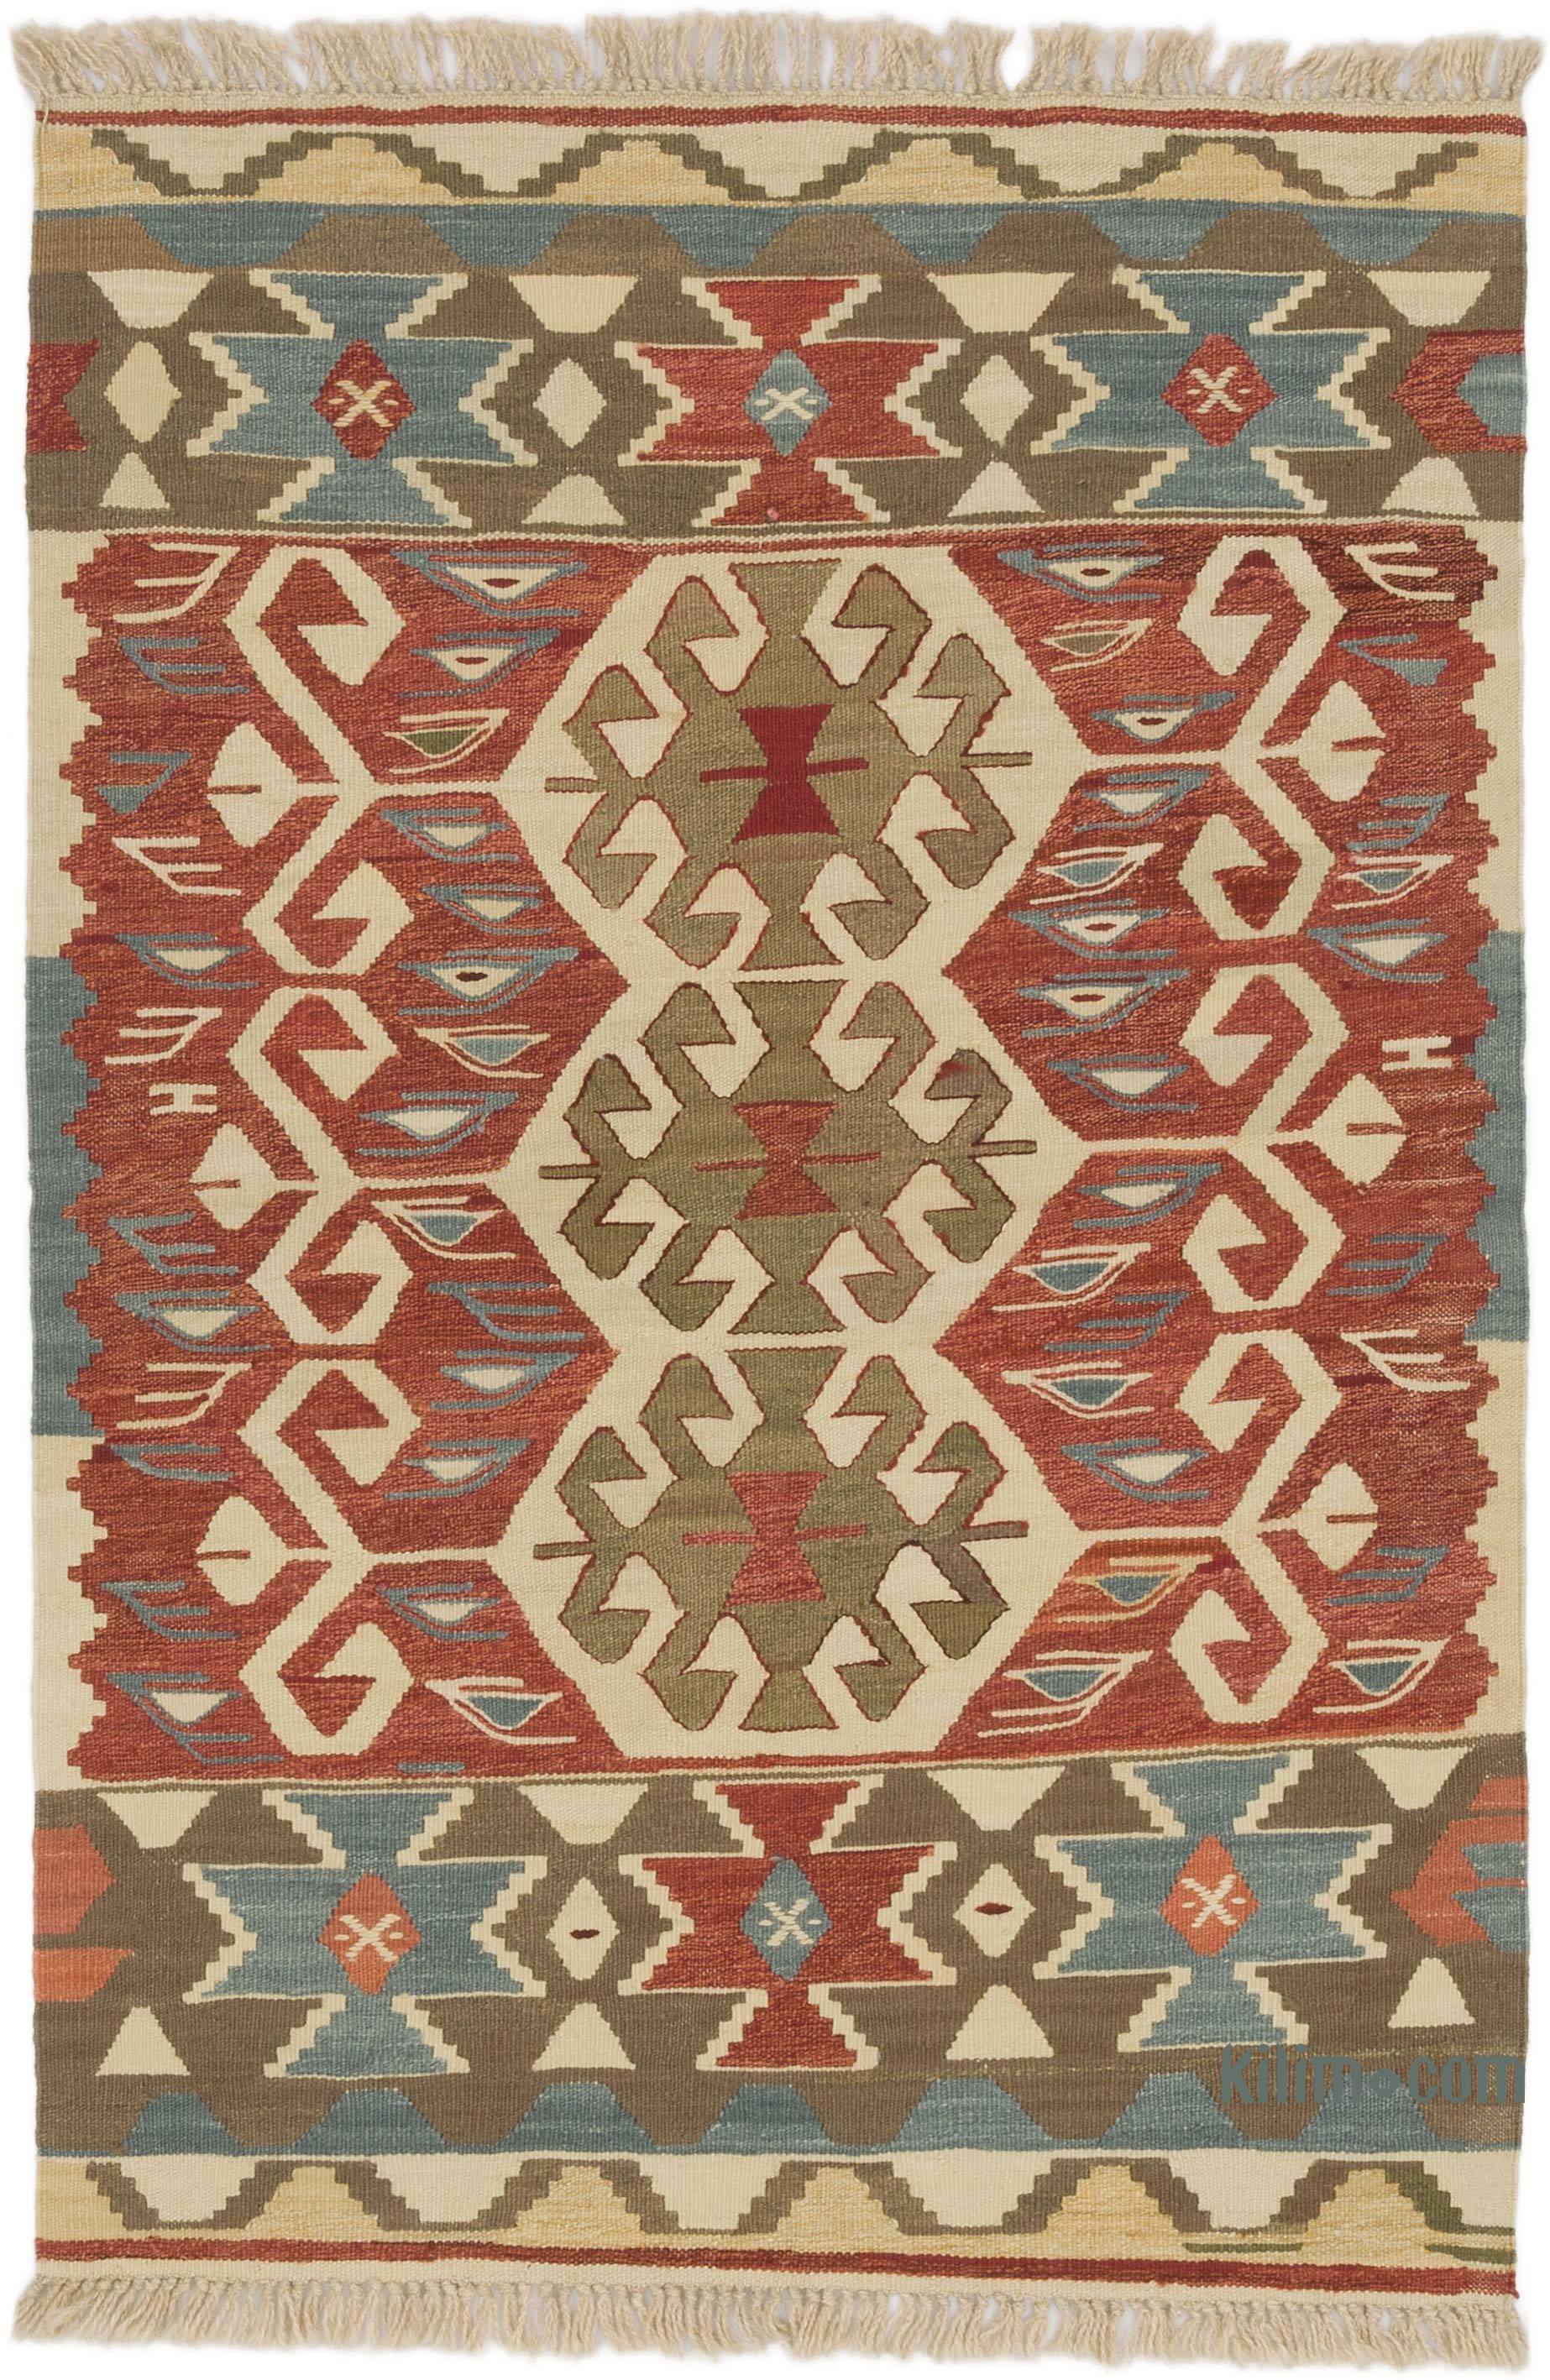 K0064448 New Handwoven Turkish Kilim Rug - 3' x 4' 5 (36 x 53)  The  Source for Vintage Rugs, Tribal Kilim Rugs, Wool Turkish Rugs, Overdyed  Persian Rugs, Runner Rugs, Patchwork